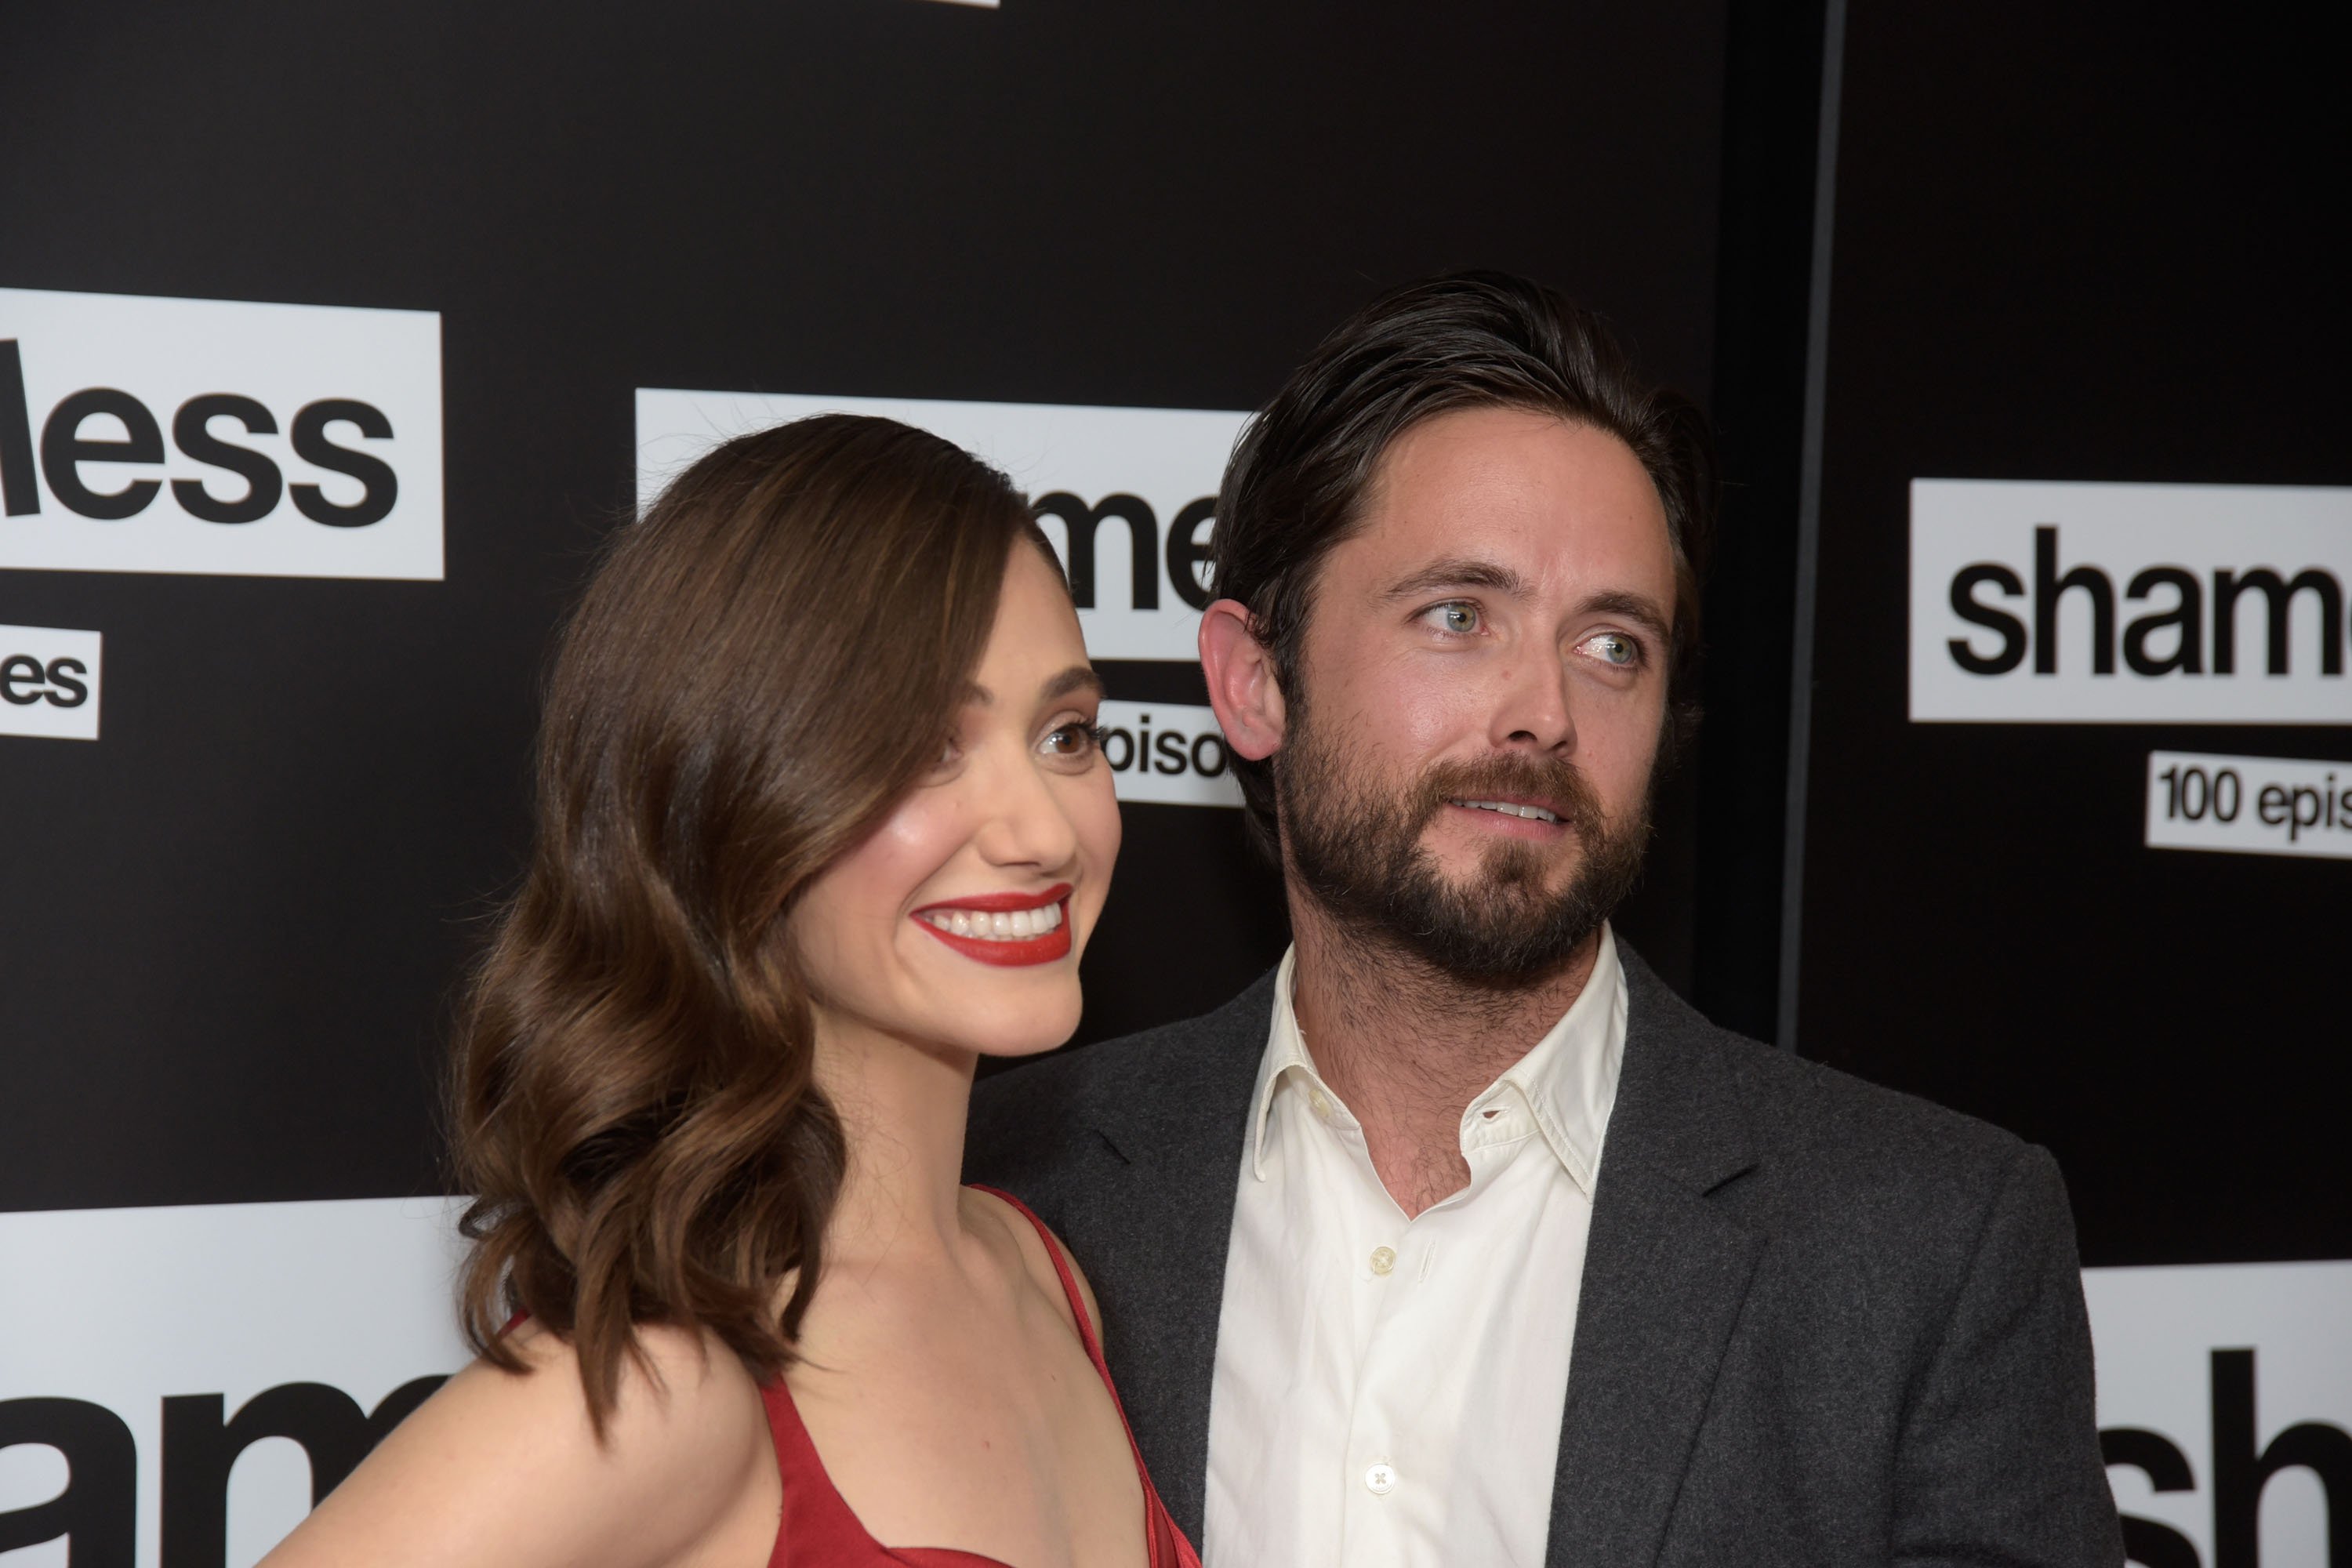 Emmy Rossum & Justin Chatwin - Love these two together